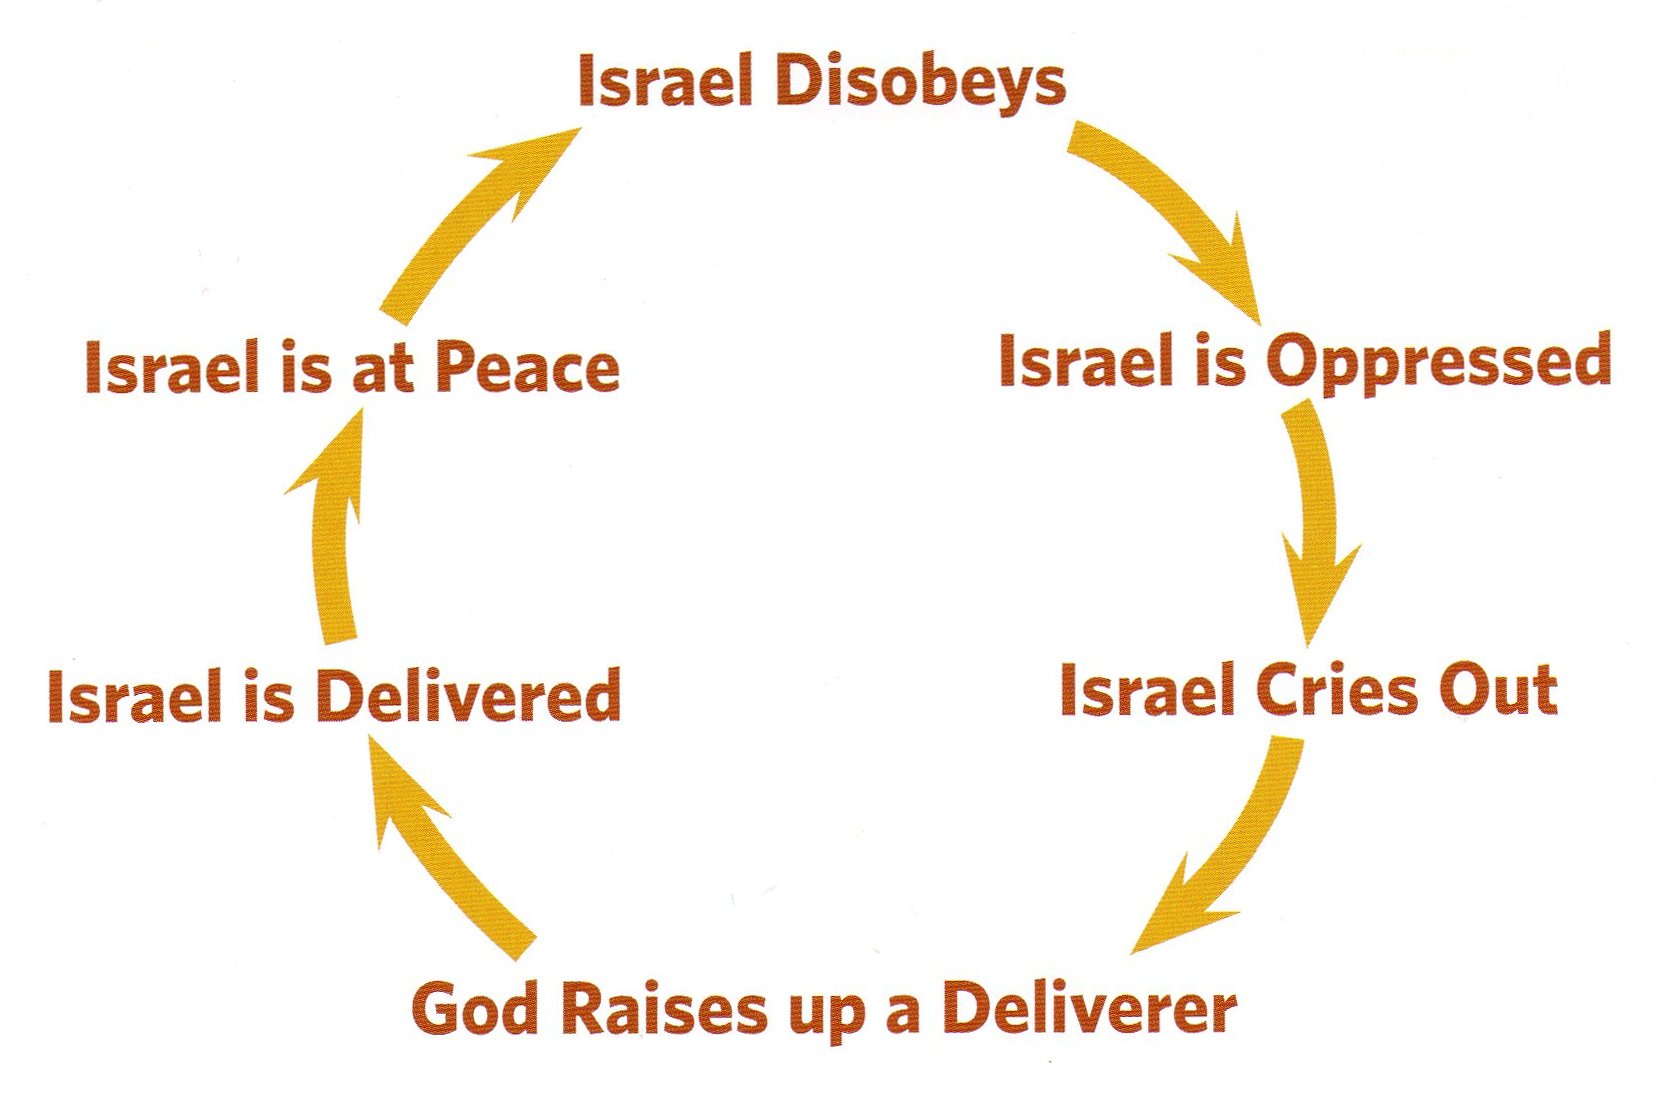 mankind's cycle of disobedience